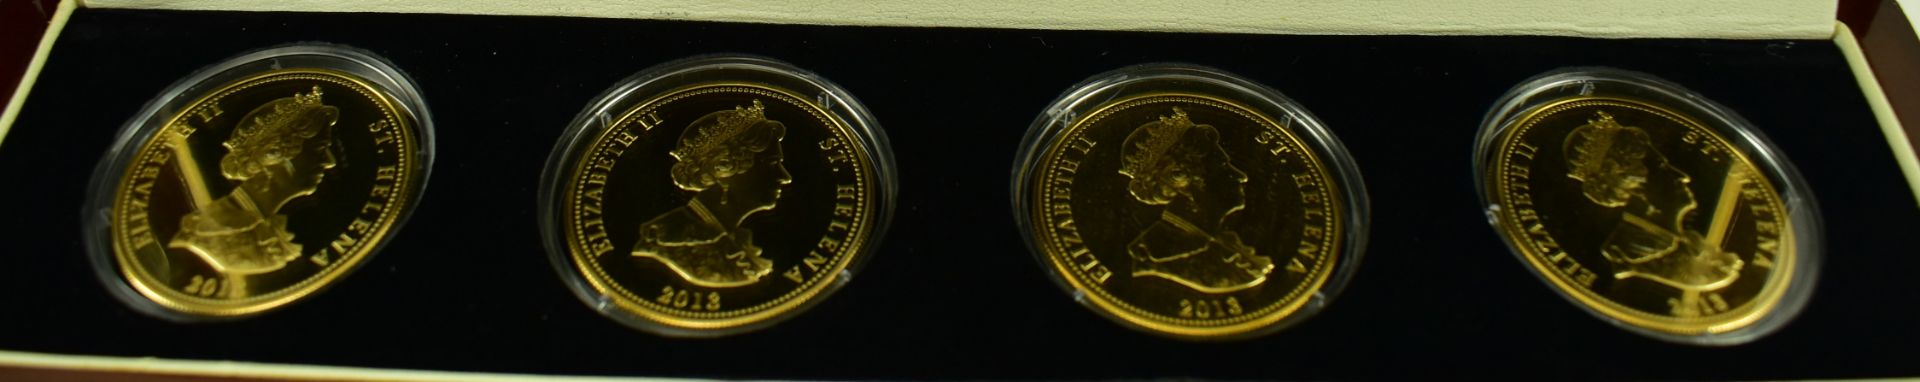 LARGE COLLECTION OF COMMEMORATIVE UK & FOREIGN COINS - Image 5 of 6